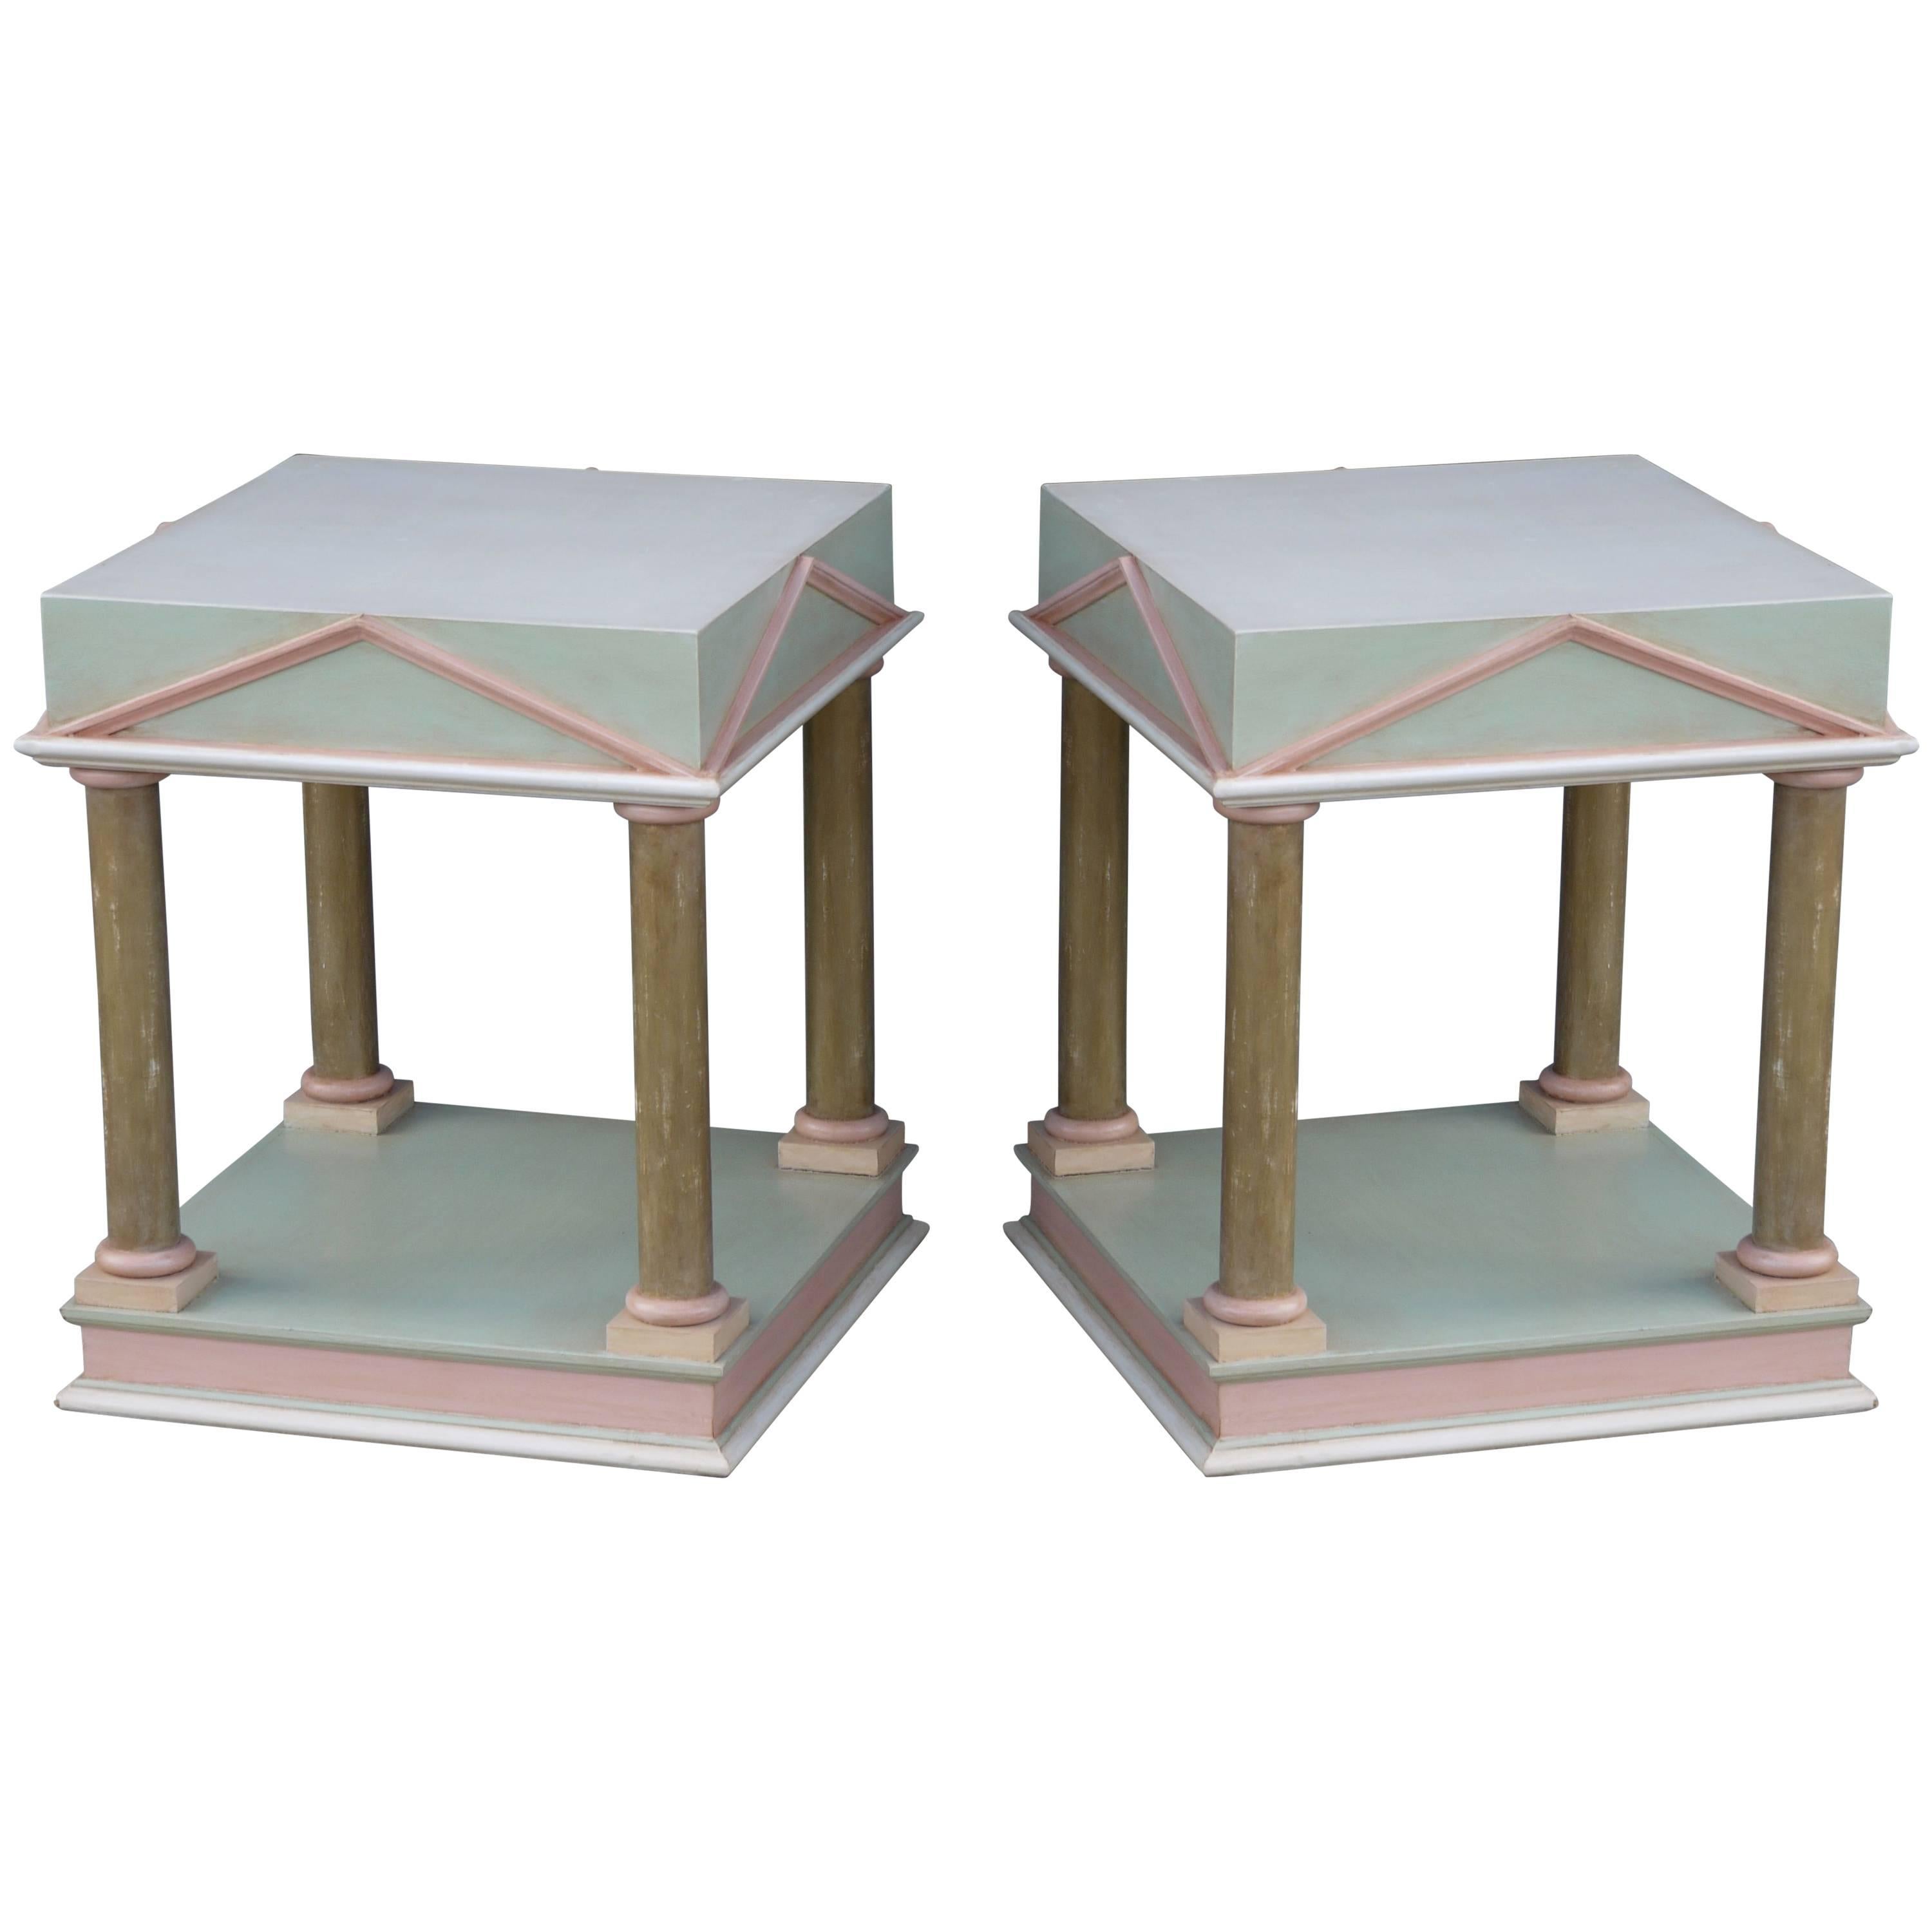 Pair of Neoclassical Inspired Post Modern Tables